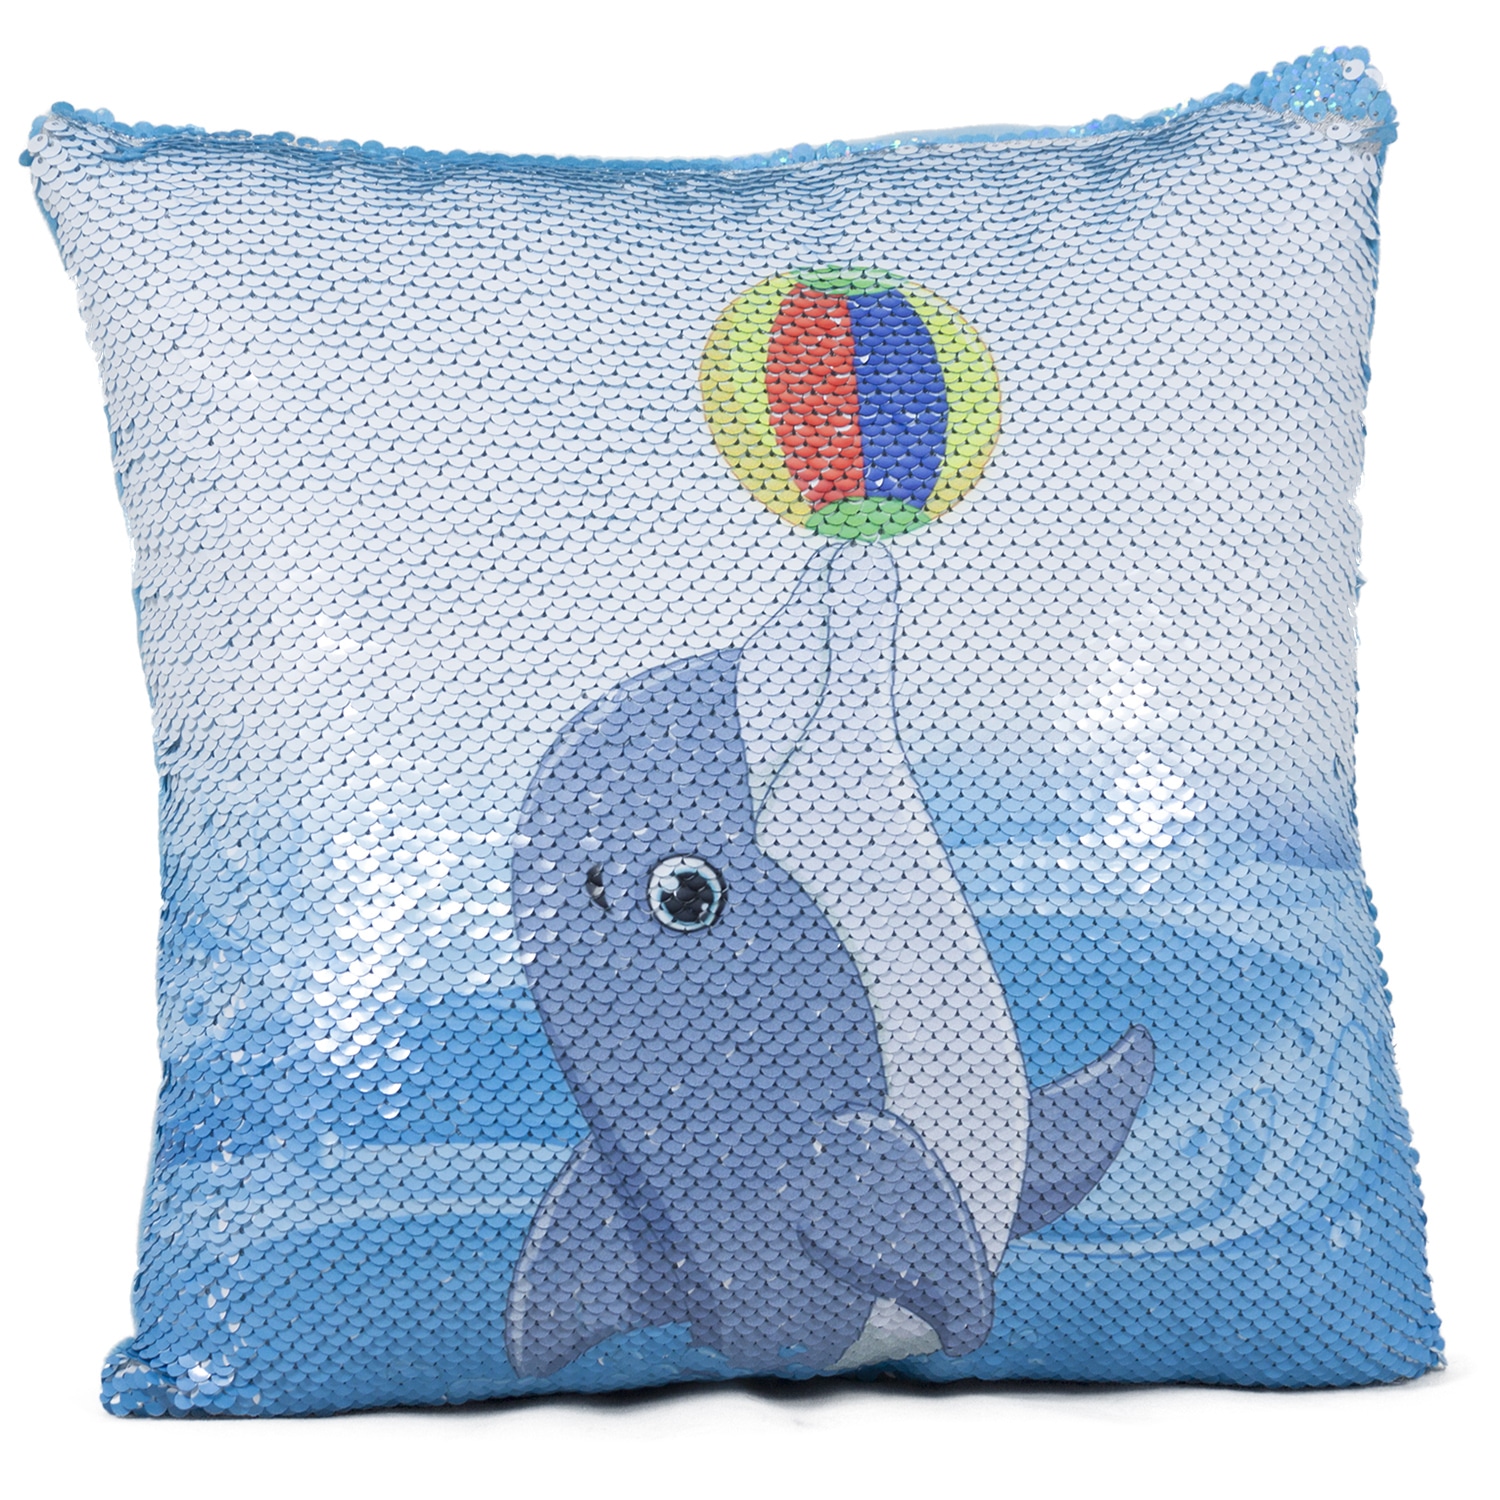 Pillow with dolphin and sequins